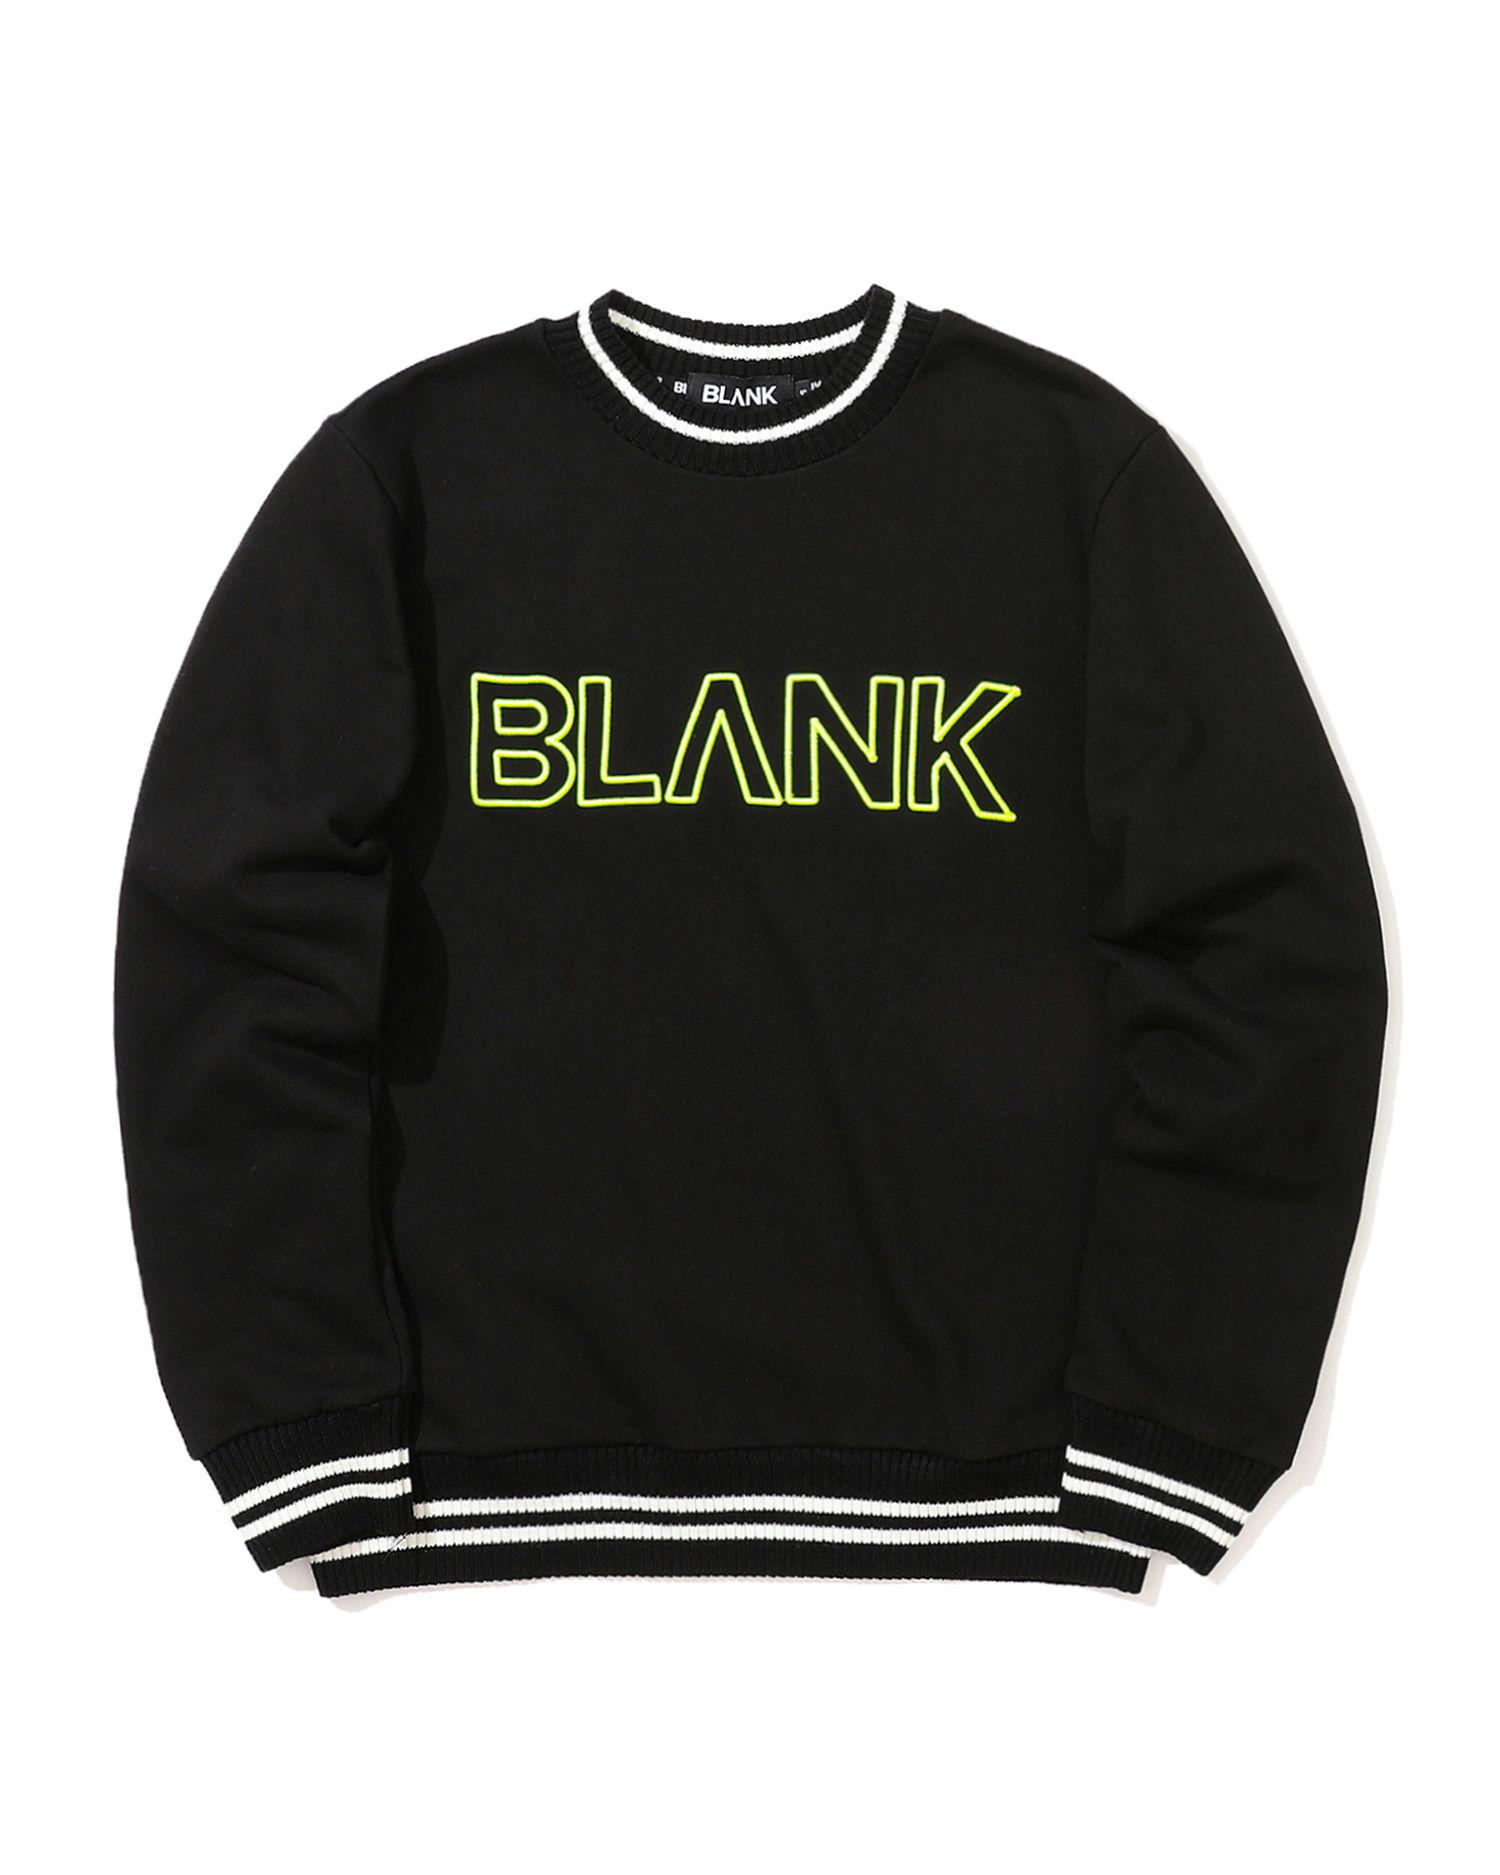 "BLANK" embroidered sweater by BLANK